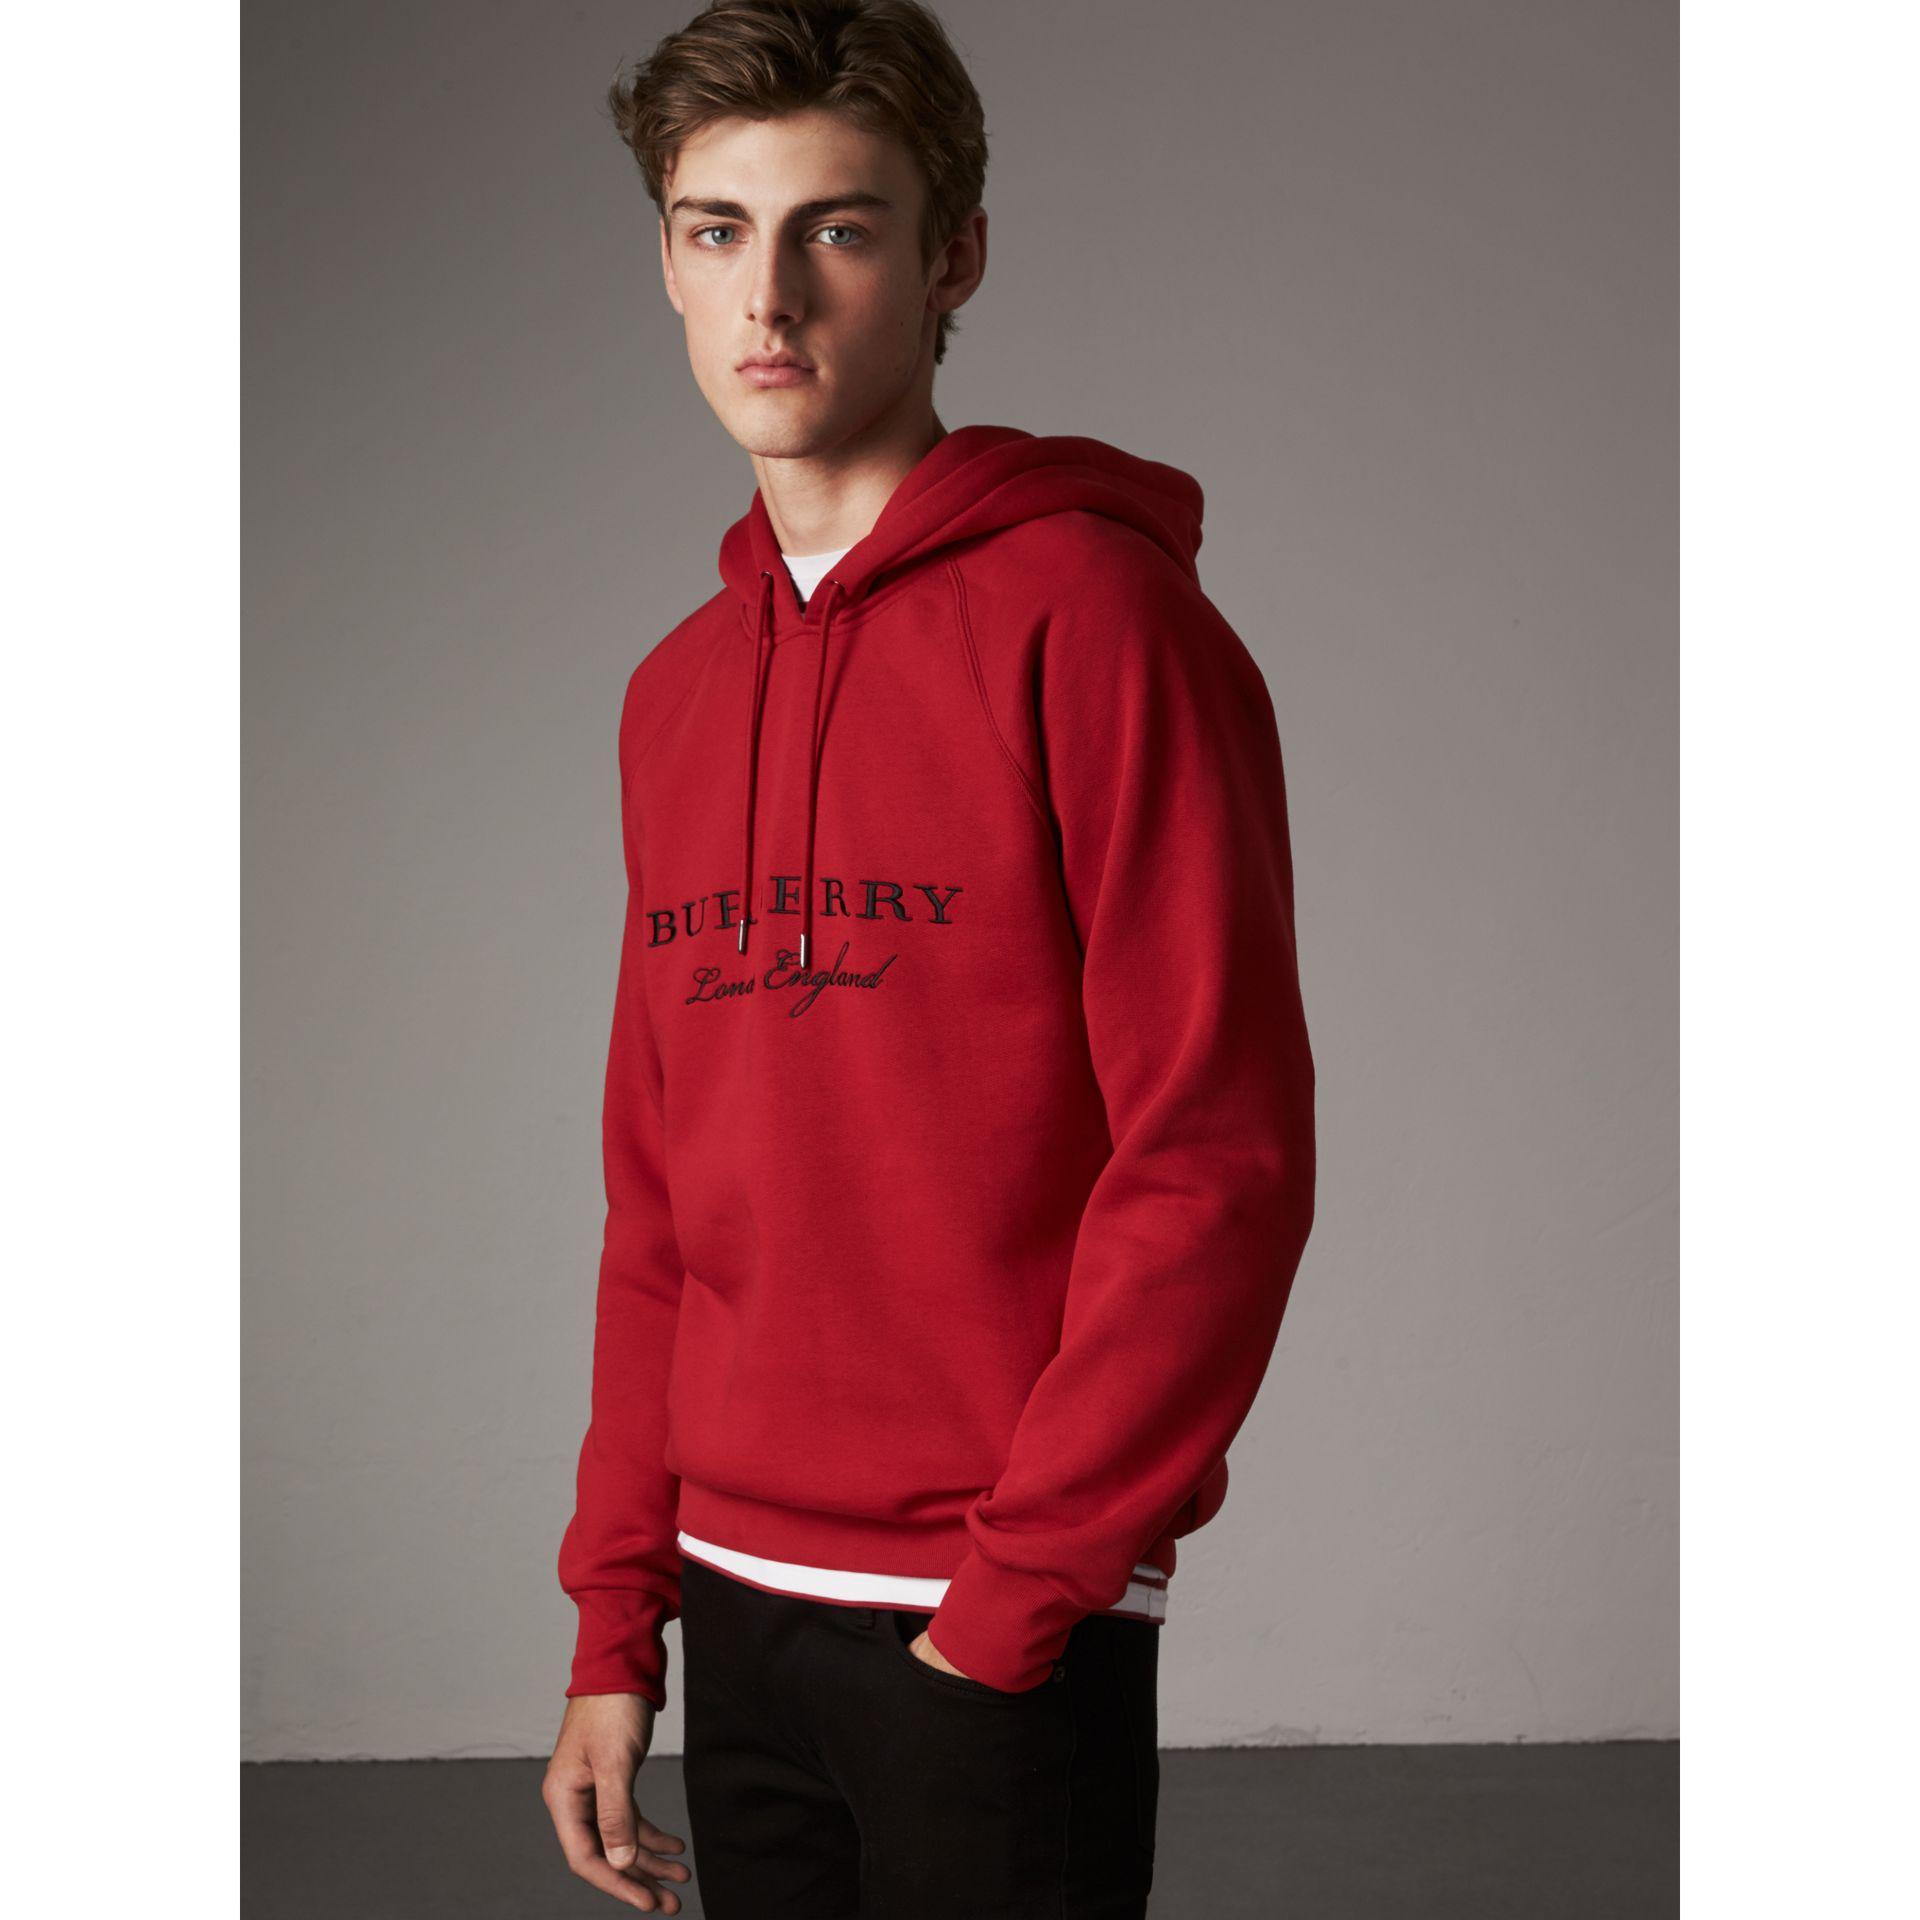 burberry red for men